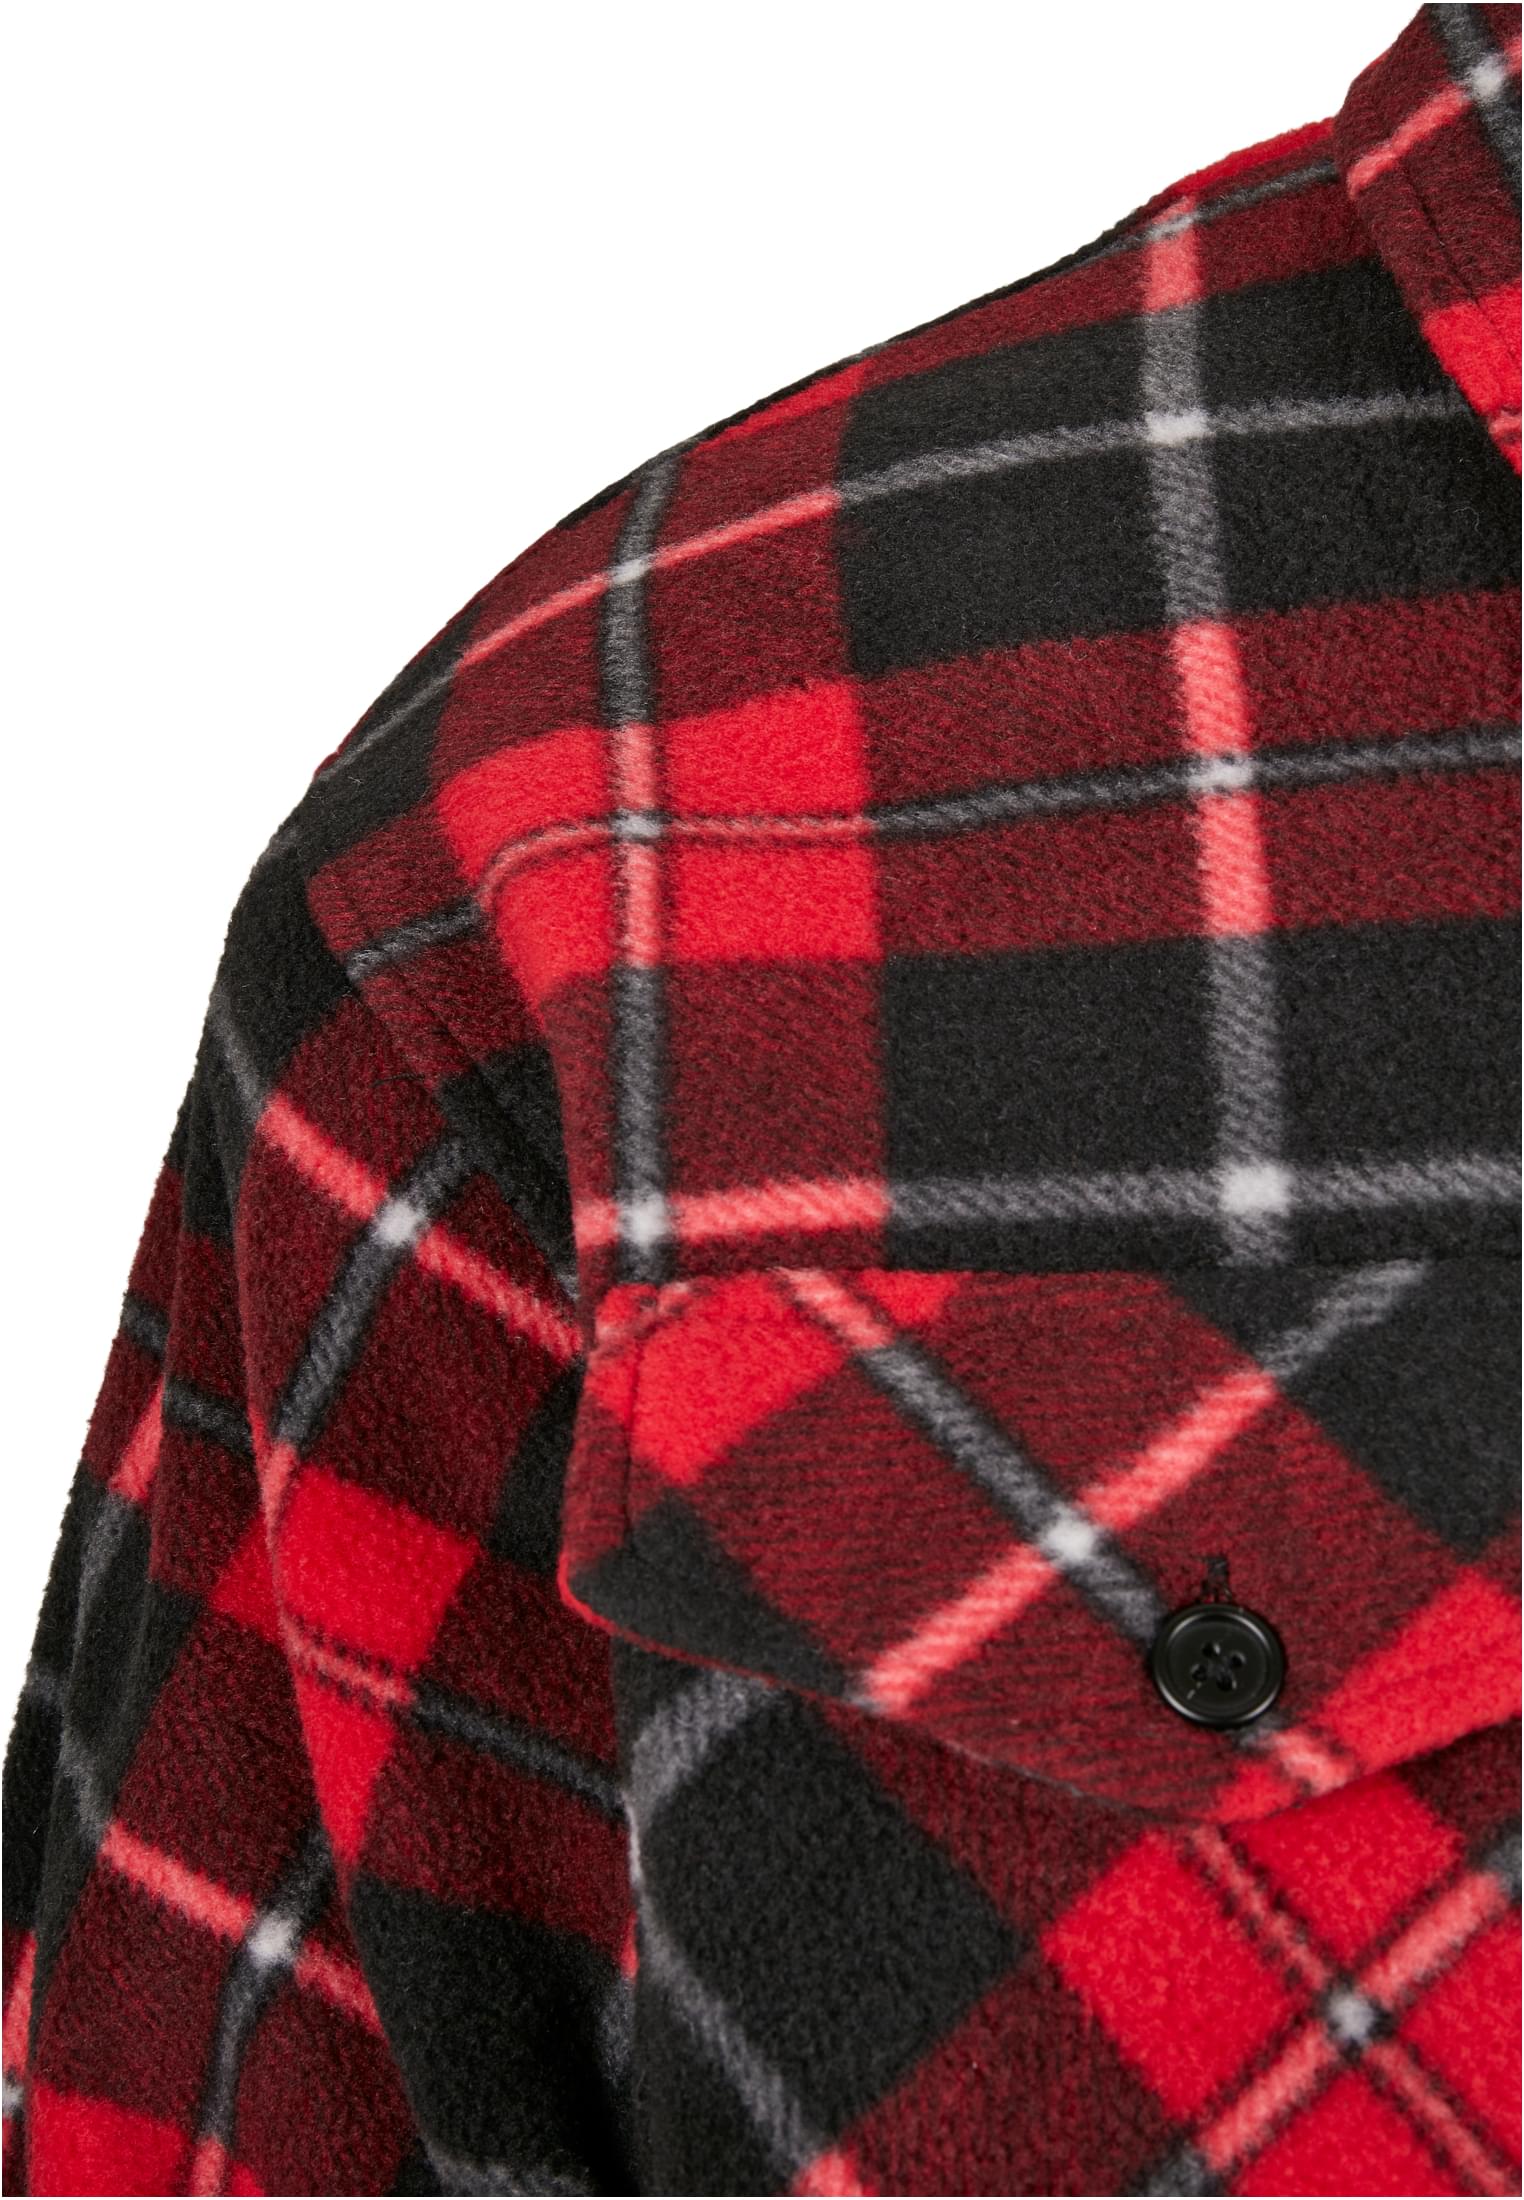 Hemden Plaid Teddy Lined Shirt Jacket in Farbe red/black